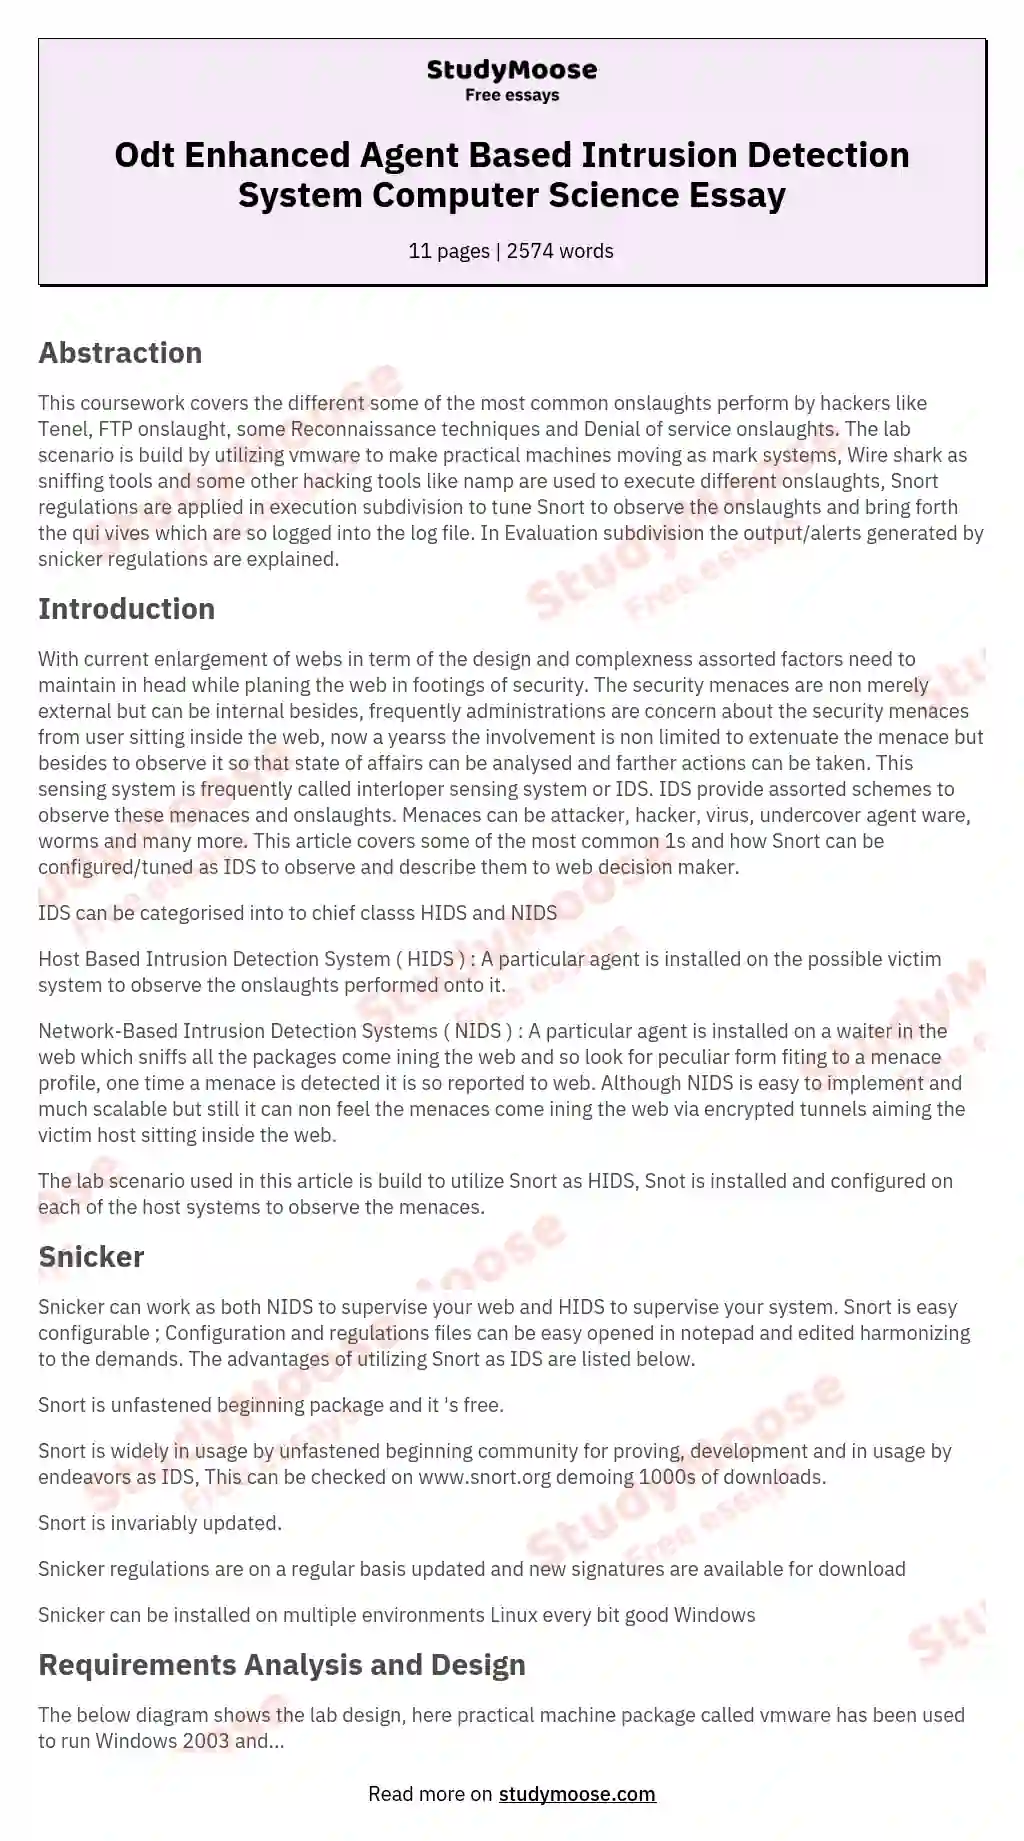 Odt Enhanced Agent Based Intrusion Detection System Computer Science Essay essay